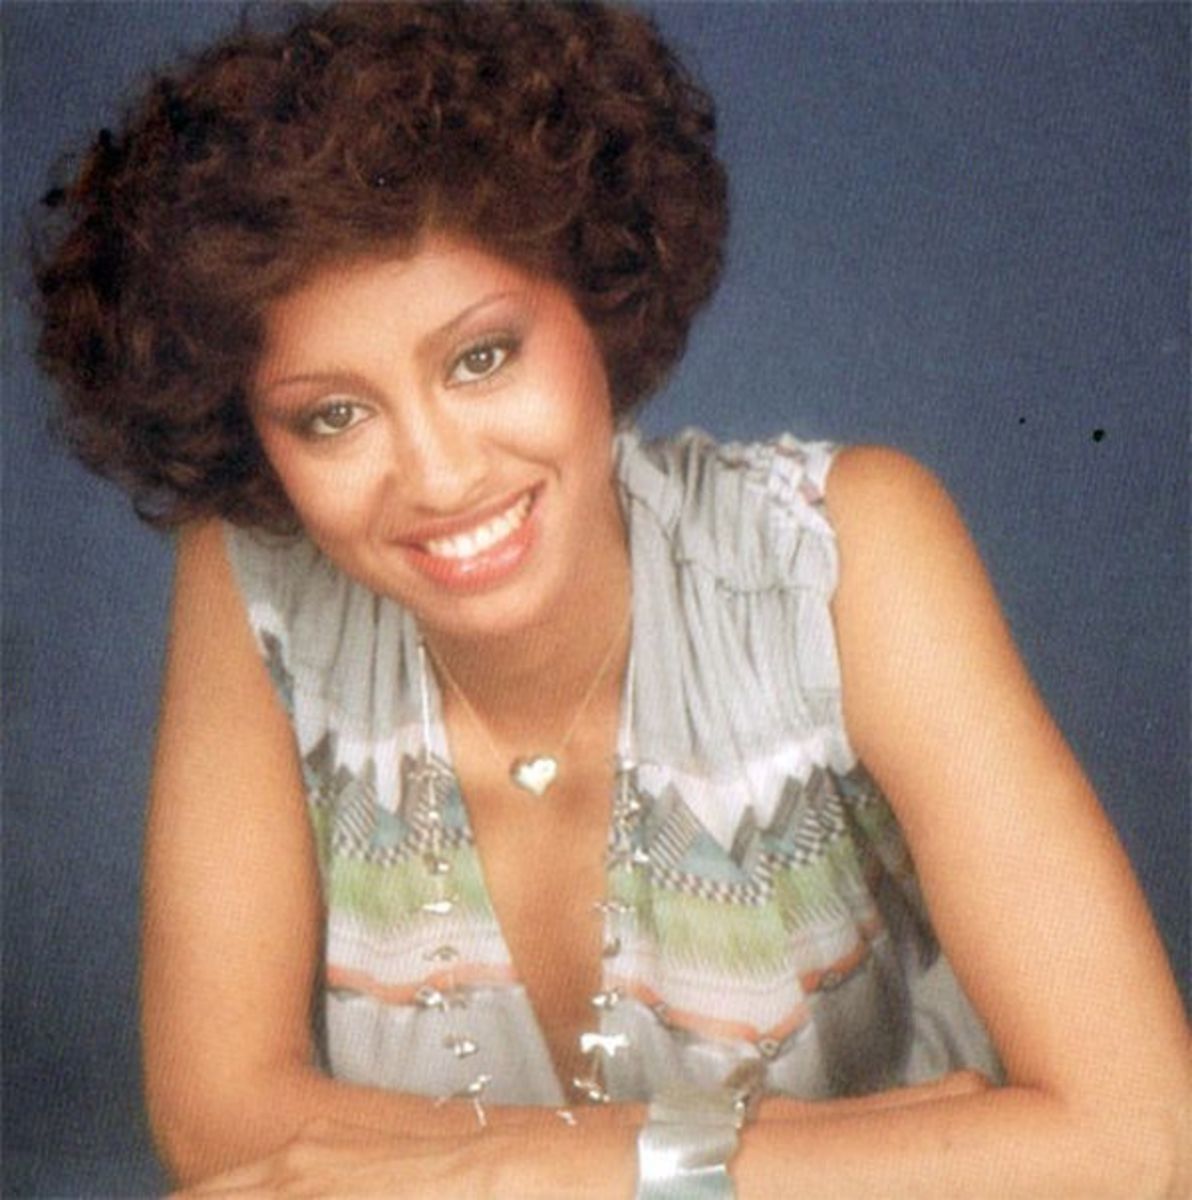 Hyman is best known for her work from the late 1970s to the early 1990s, with some of her most famous songs including "You Know How to Love Me."